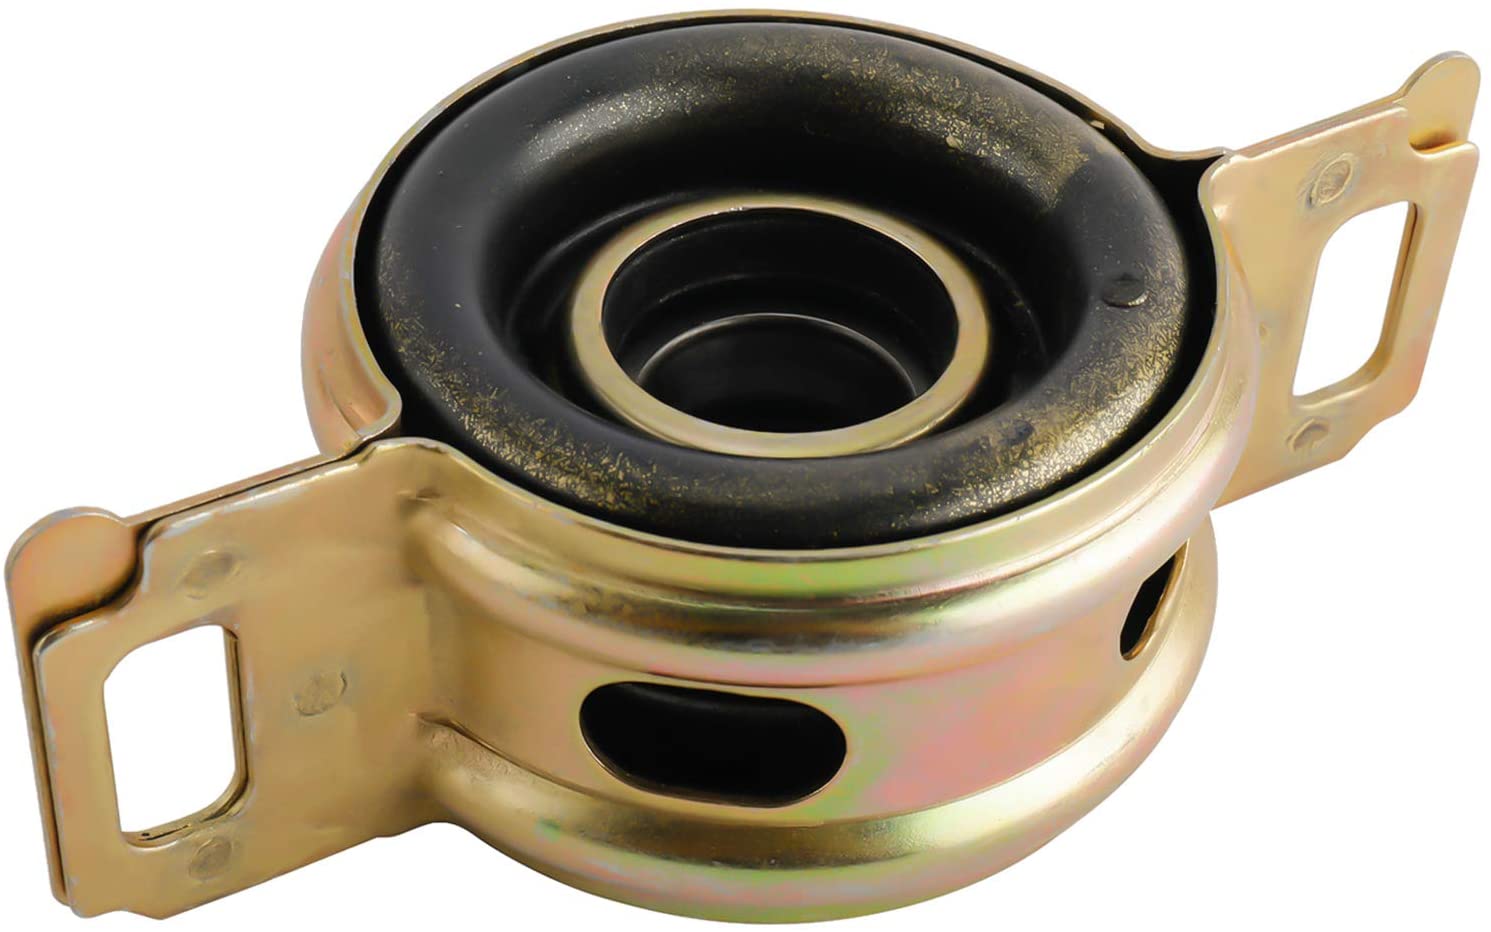 NovelBee 37230-35130 Drive Shaft Center Support Bearing Replacement for 1995-2012 Toyota Tacoma 2000-2006 Toyota Tundra 1993-1998 Toyota T100 4WD